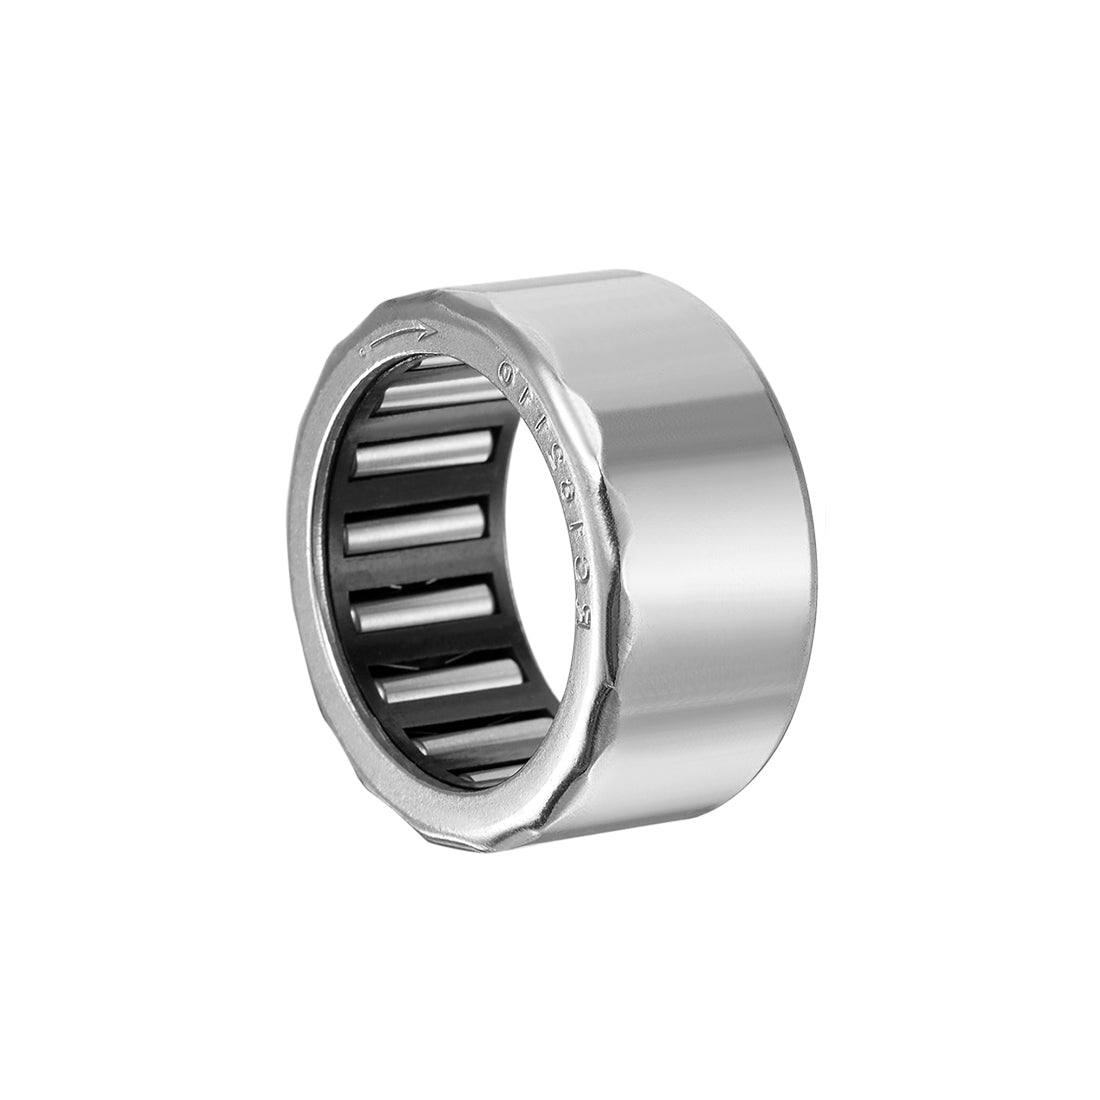 uxcell Uxcell RC101410 Needle Roller Bearings, One Way Bearing, 5/8" Bore 7/8" OD 5/8" Width 2pcs